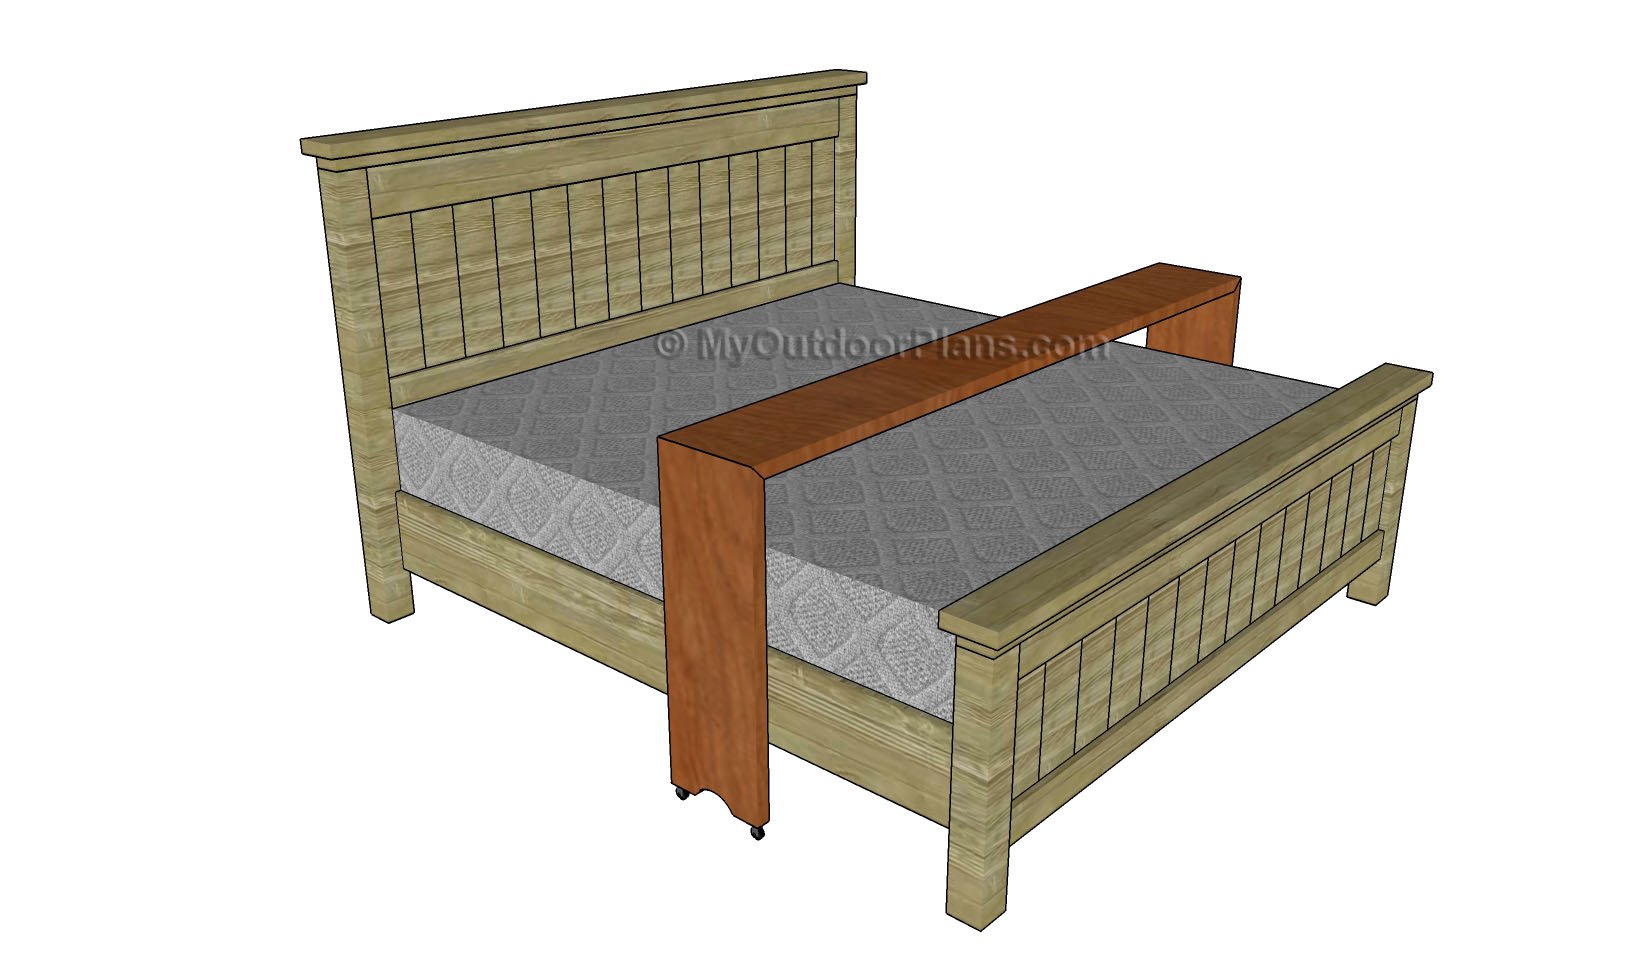 Bed Table Plans | Free Outdoor Plans - DIY Shed, Wooden Playhouse, Bbq 